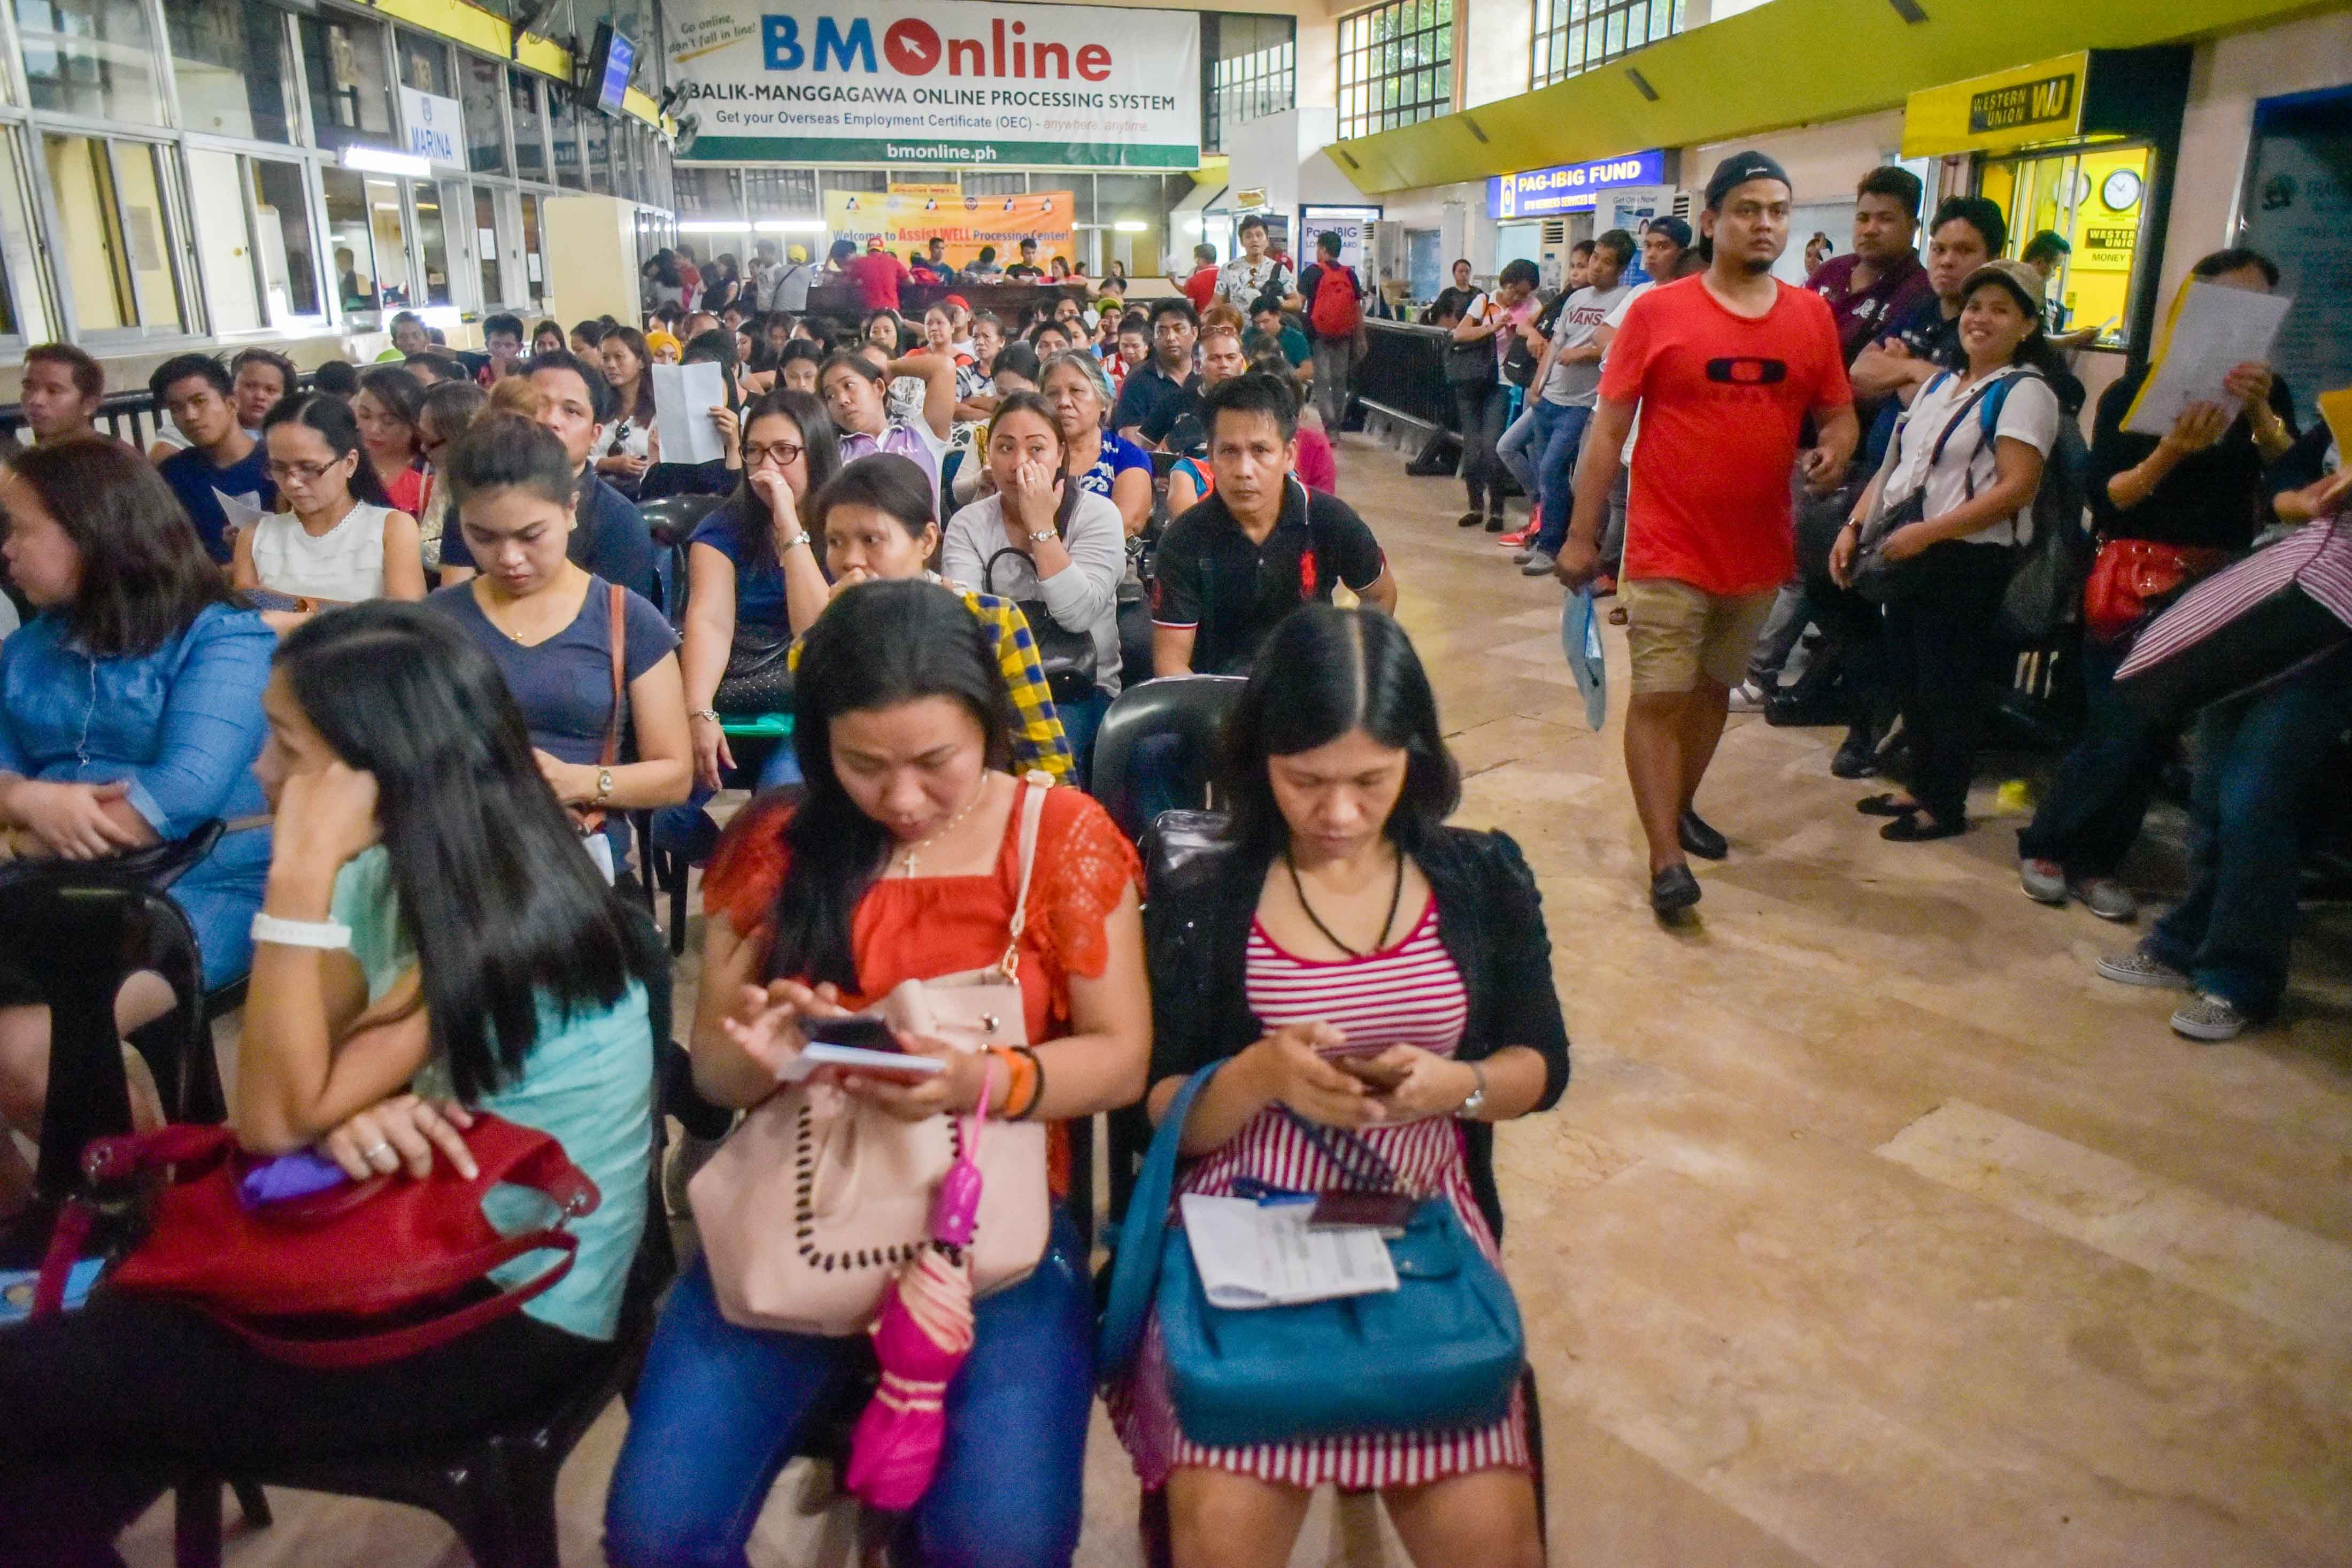 EMPLOYMENT CERTIFICATE. At least 5,000 OFWs go to the POEA to get an Overseas Employment Certificate everyday. According to DOLE, the suspension might affect around 75,000 OFWs. File photo by LeAnne Jazul/Rappler  